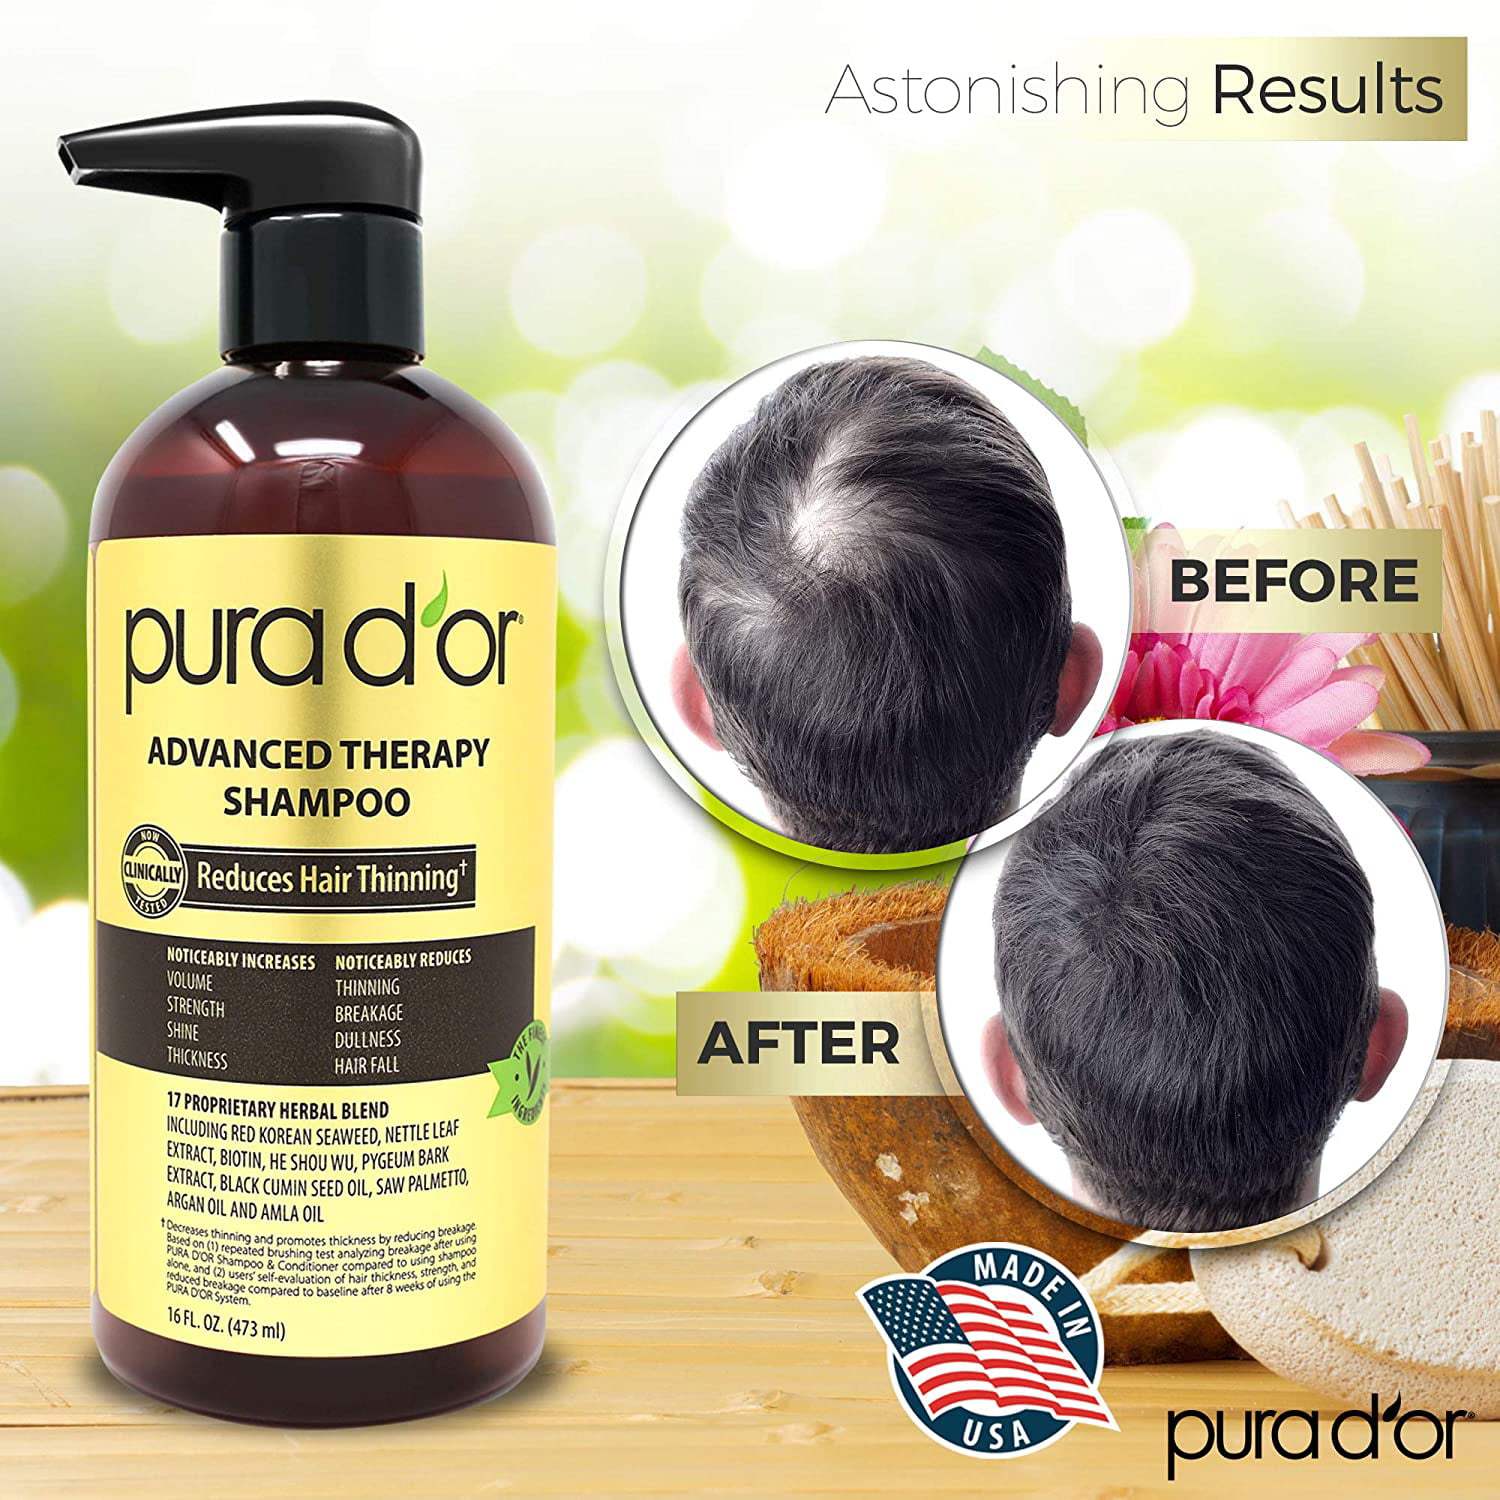 PURA D'OR Advanced Therapy Shampoo (16oz) Reduces Hair Thinning & Increases  Volume, No Sulfate, Biotin Shampoo Infused with Argan Oil, Aloe Vera for